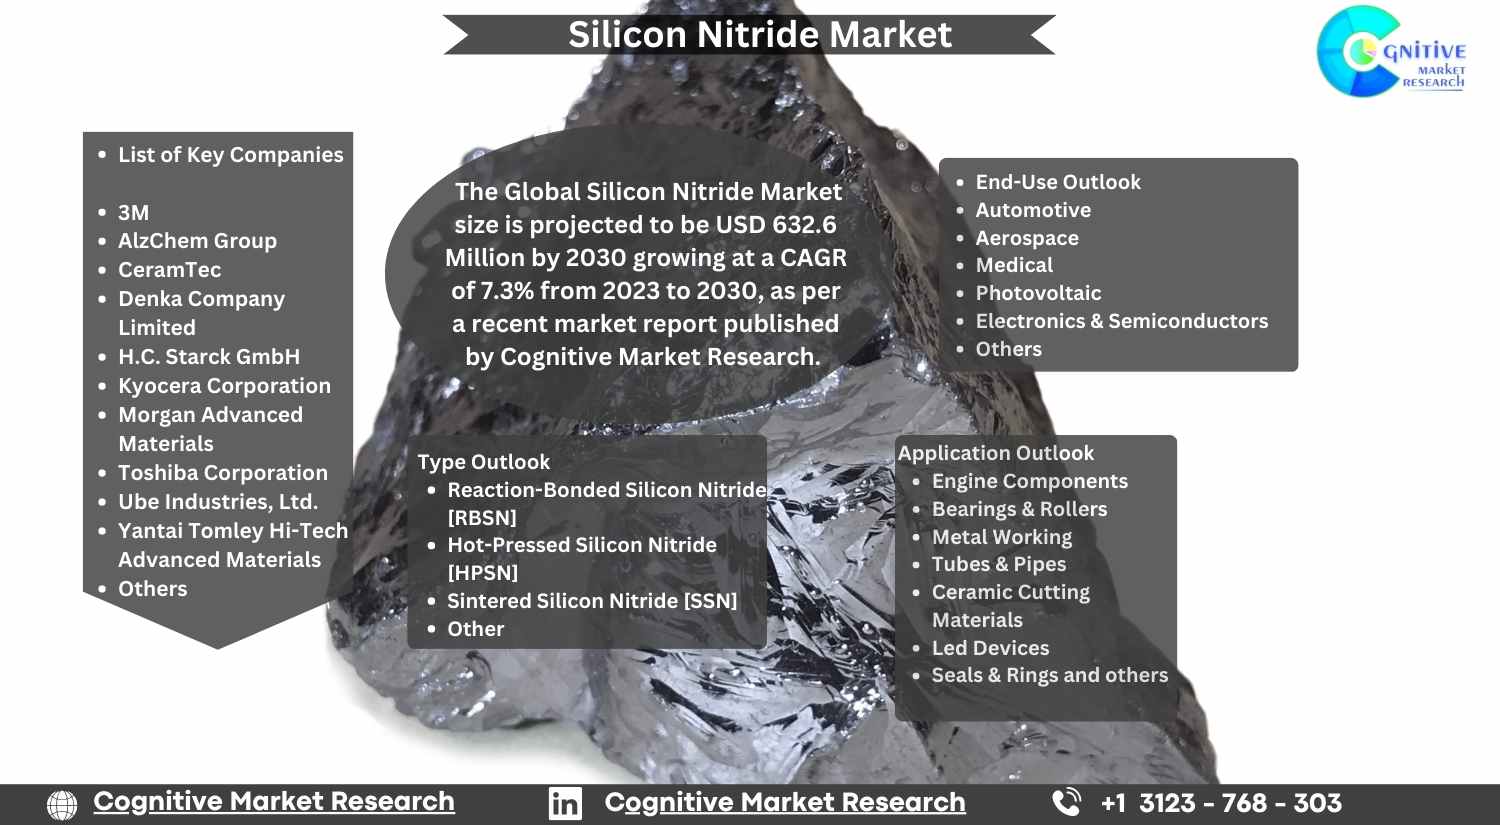 Silicon Nitride Market to Reach USD 632.6 million by 2030: Cognitive Market Research